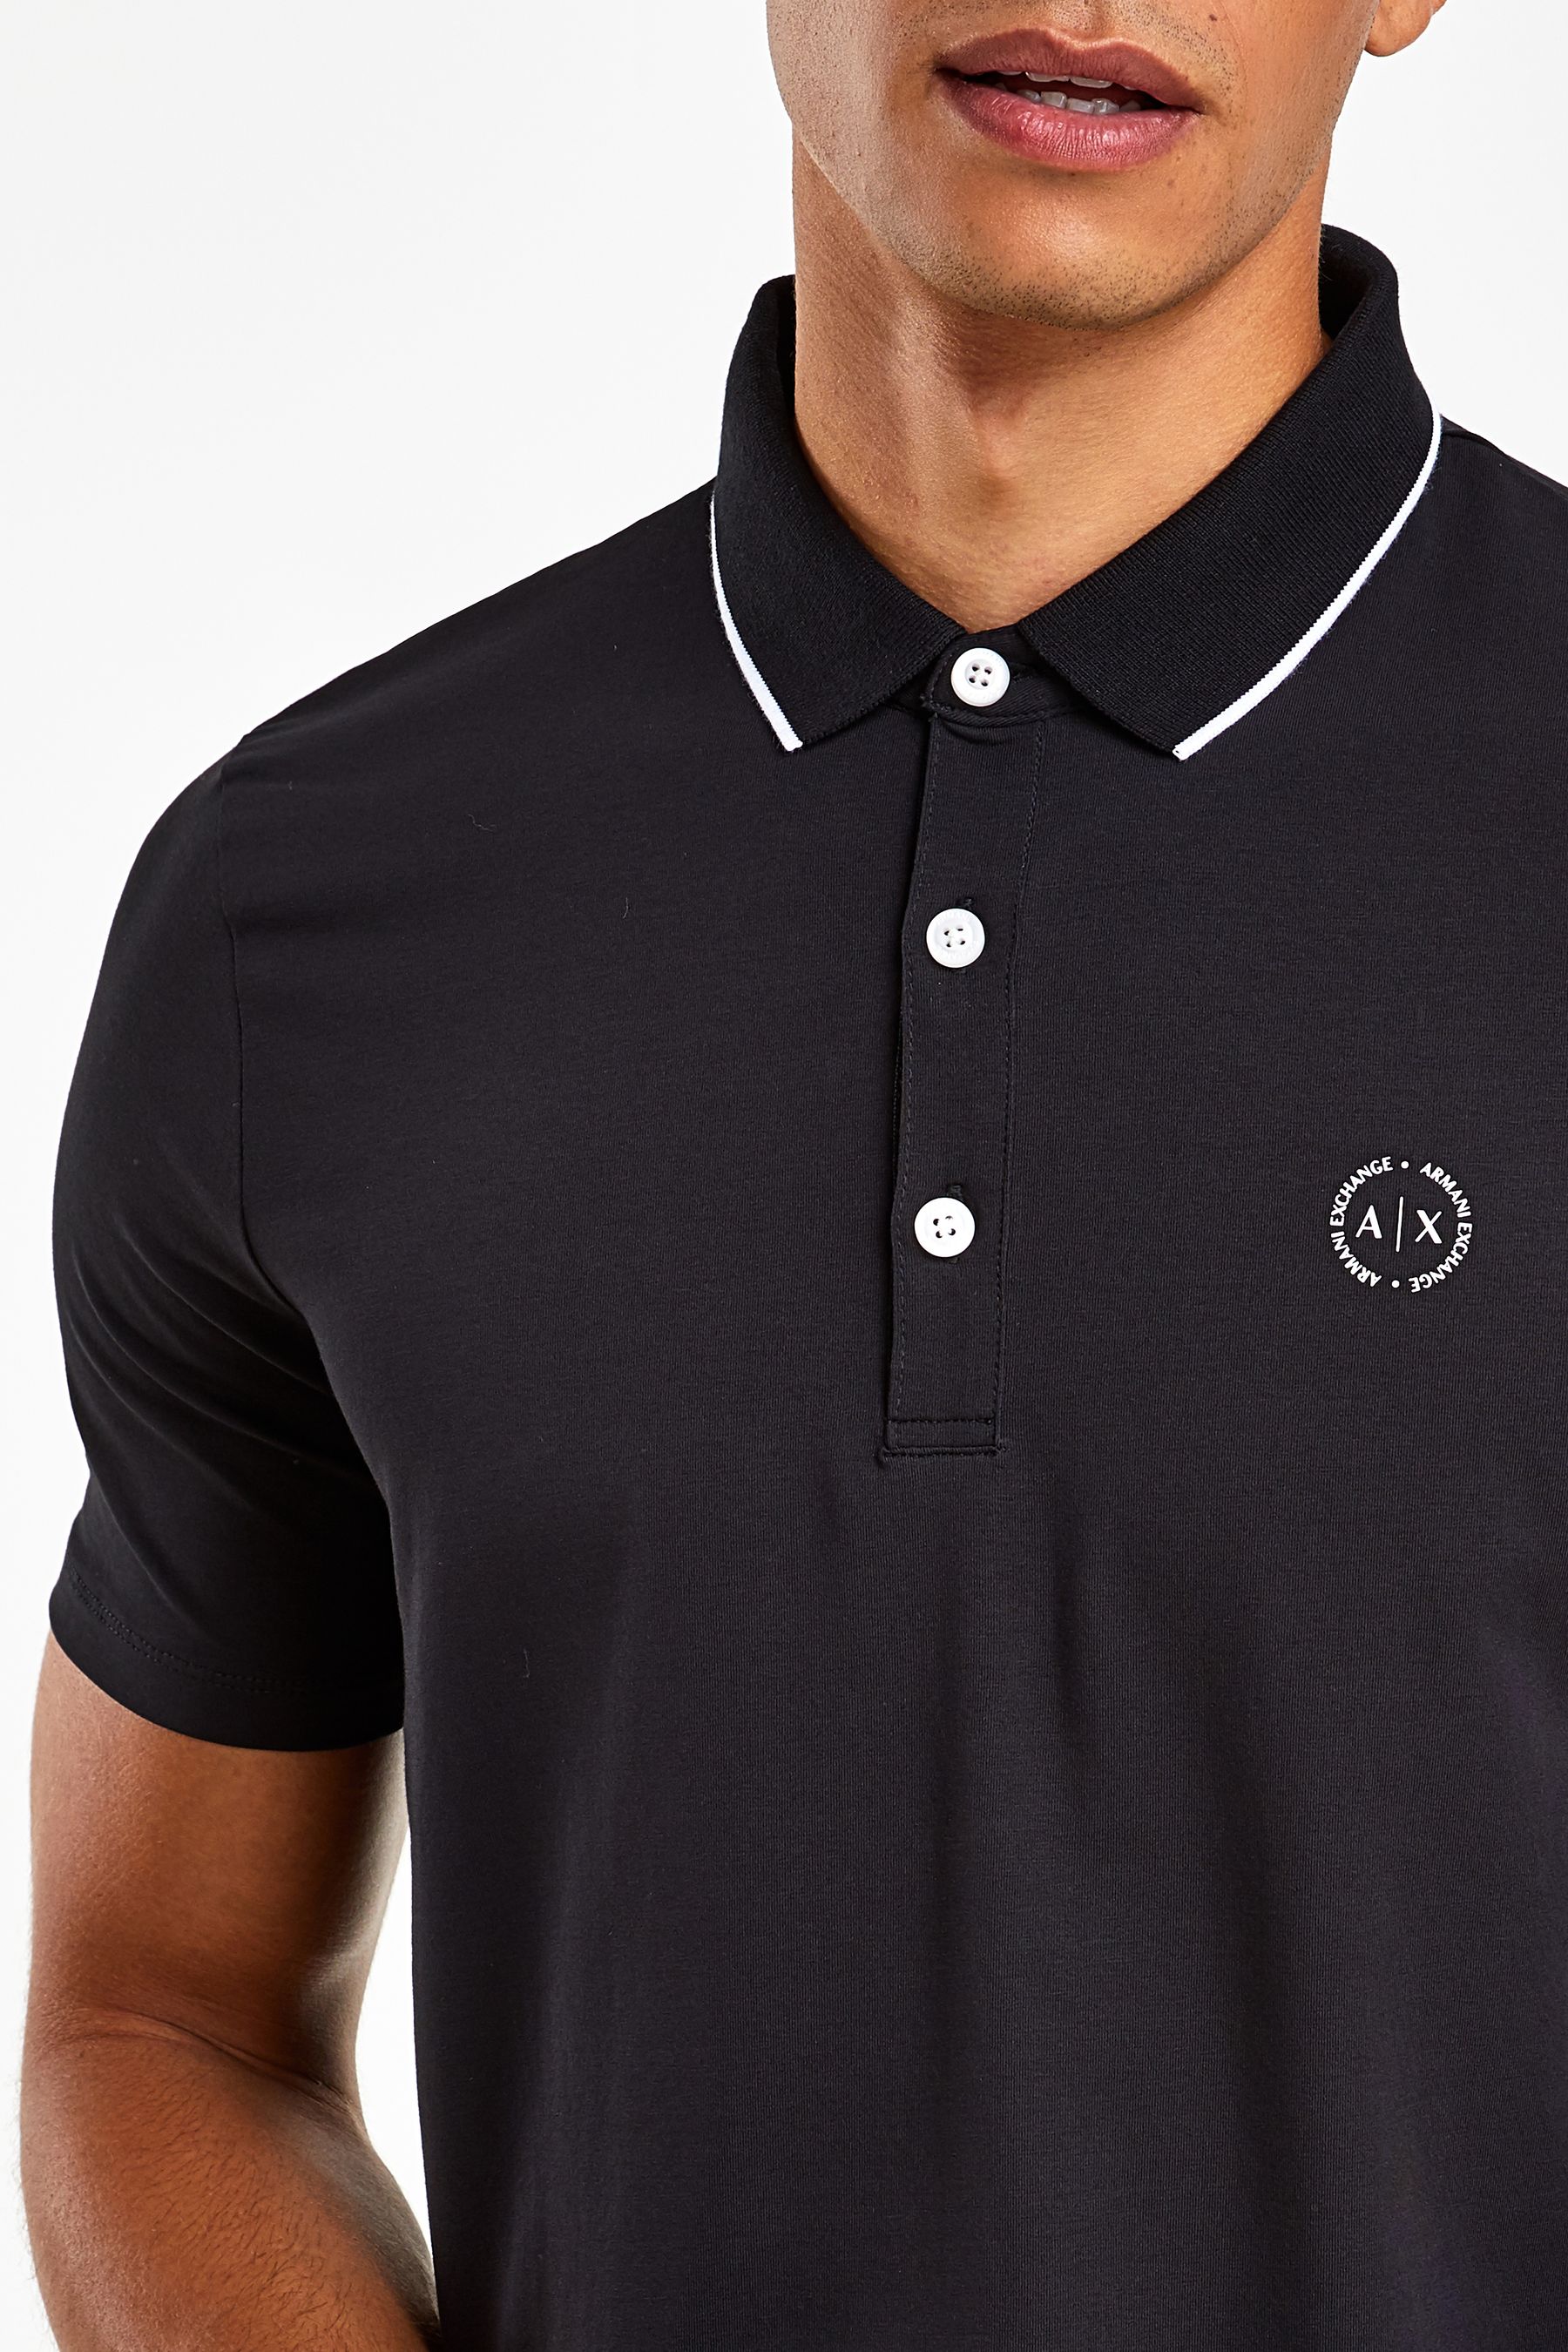 Buy Armani Exchange Tipped Polo Shirt from the Next UK online shop